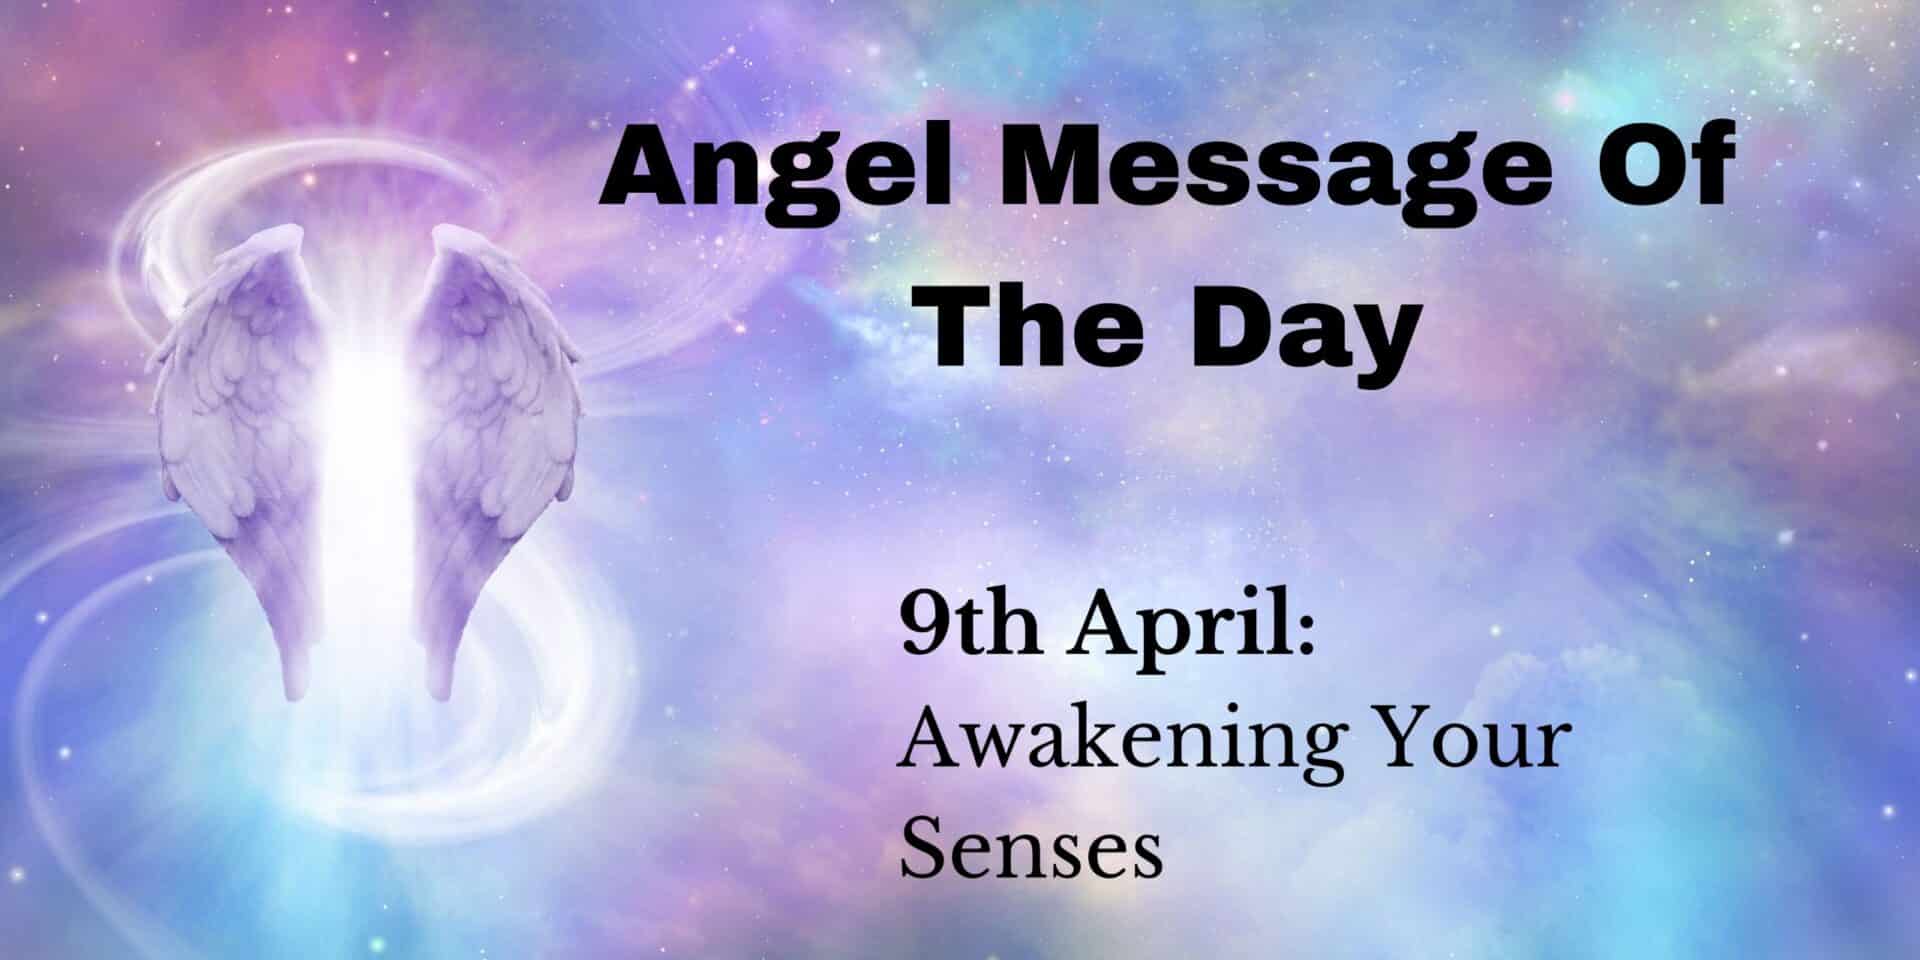 angel message of the day : awakening your senses